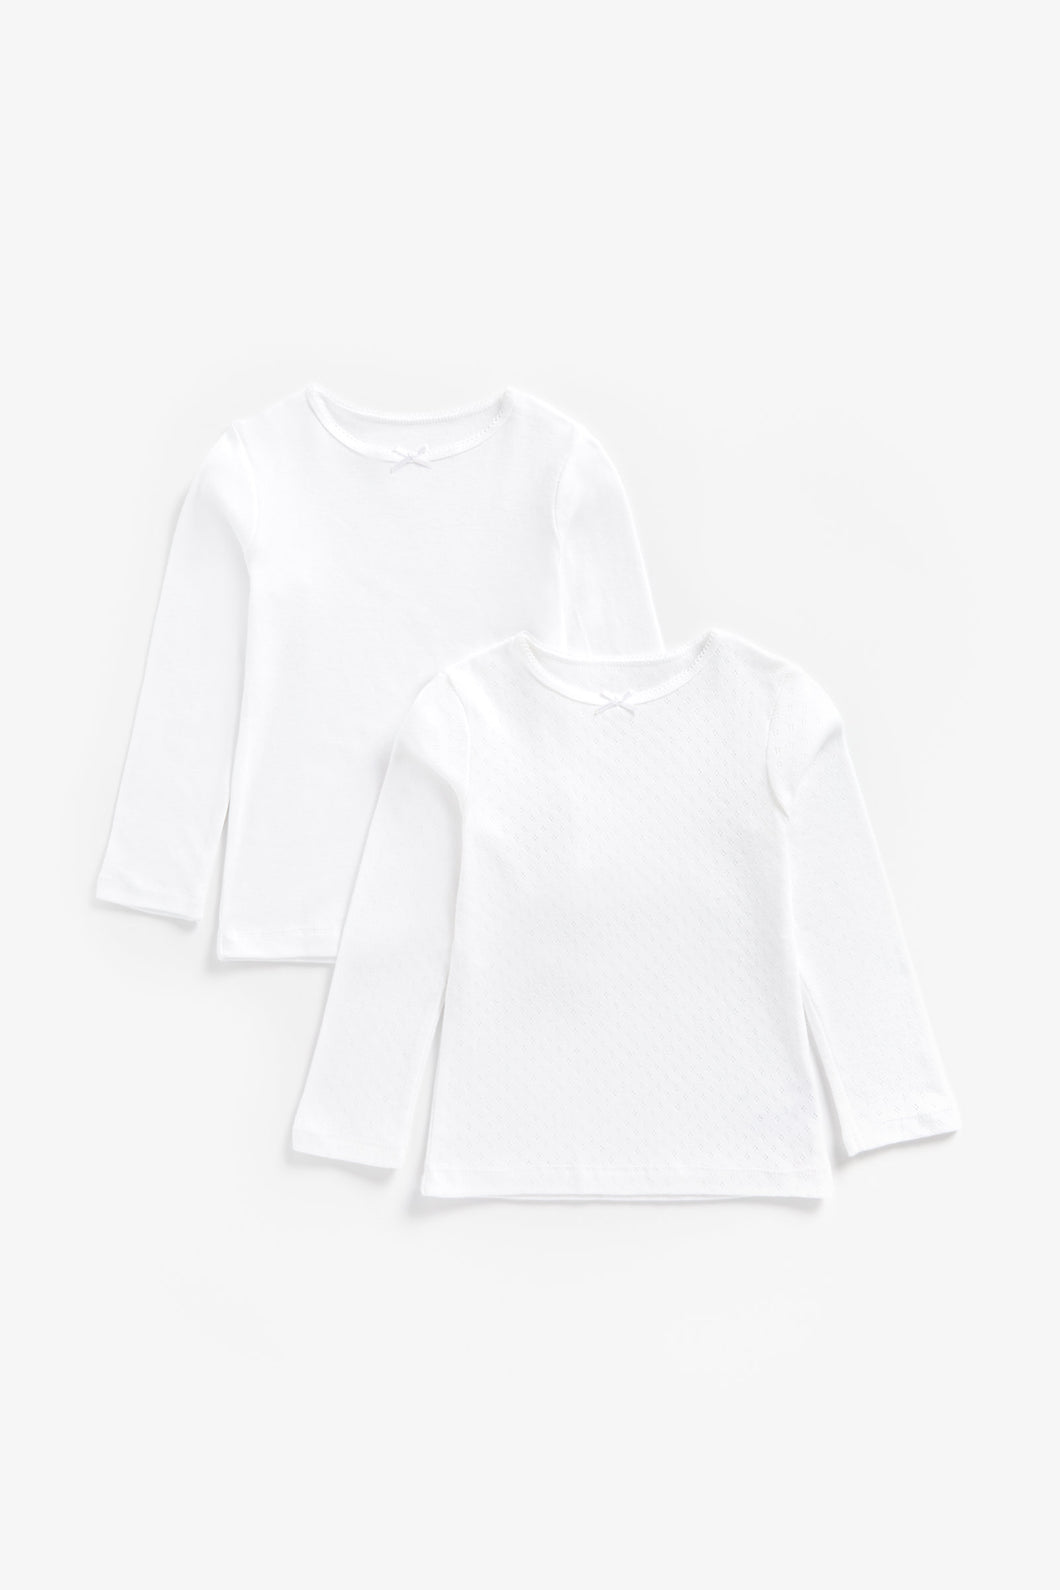 Mothercare White Long-Sleeved Vests - 2 Pack